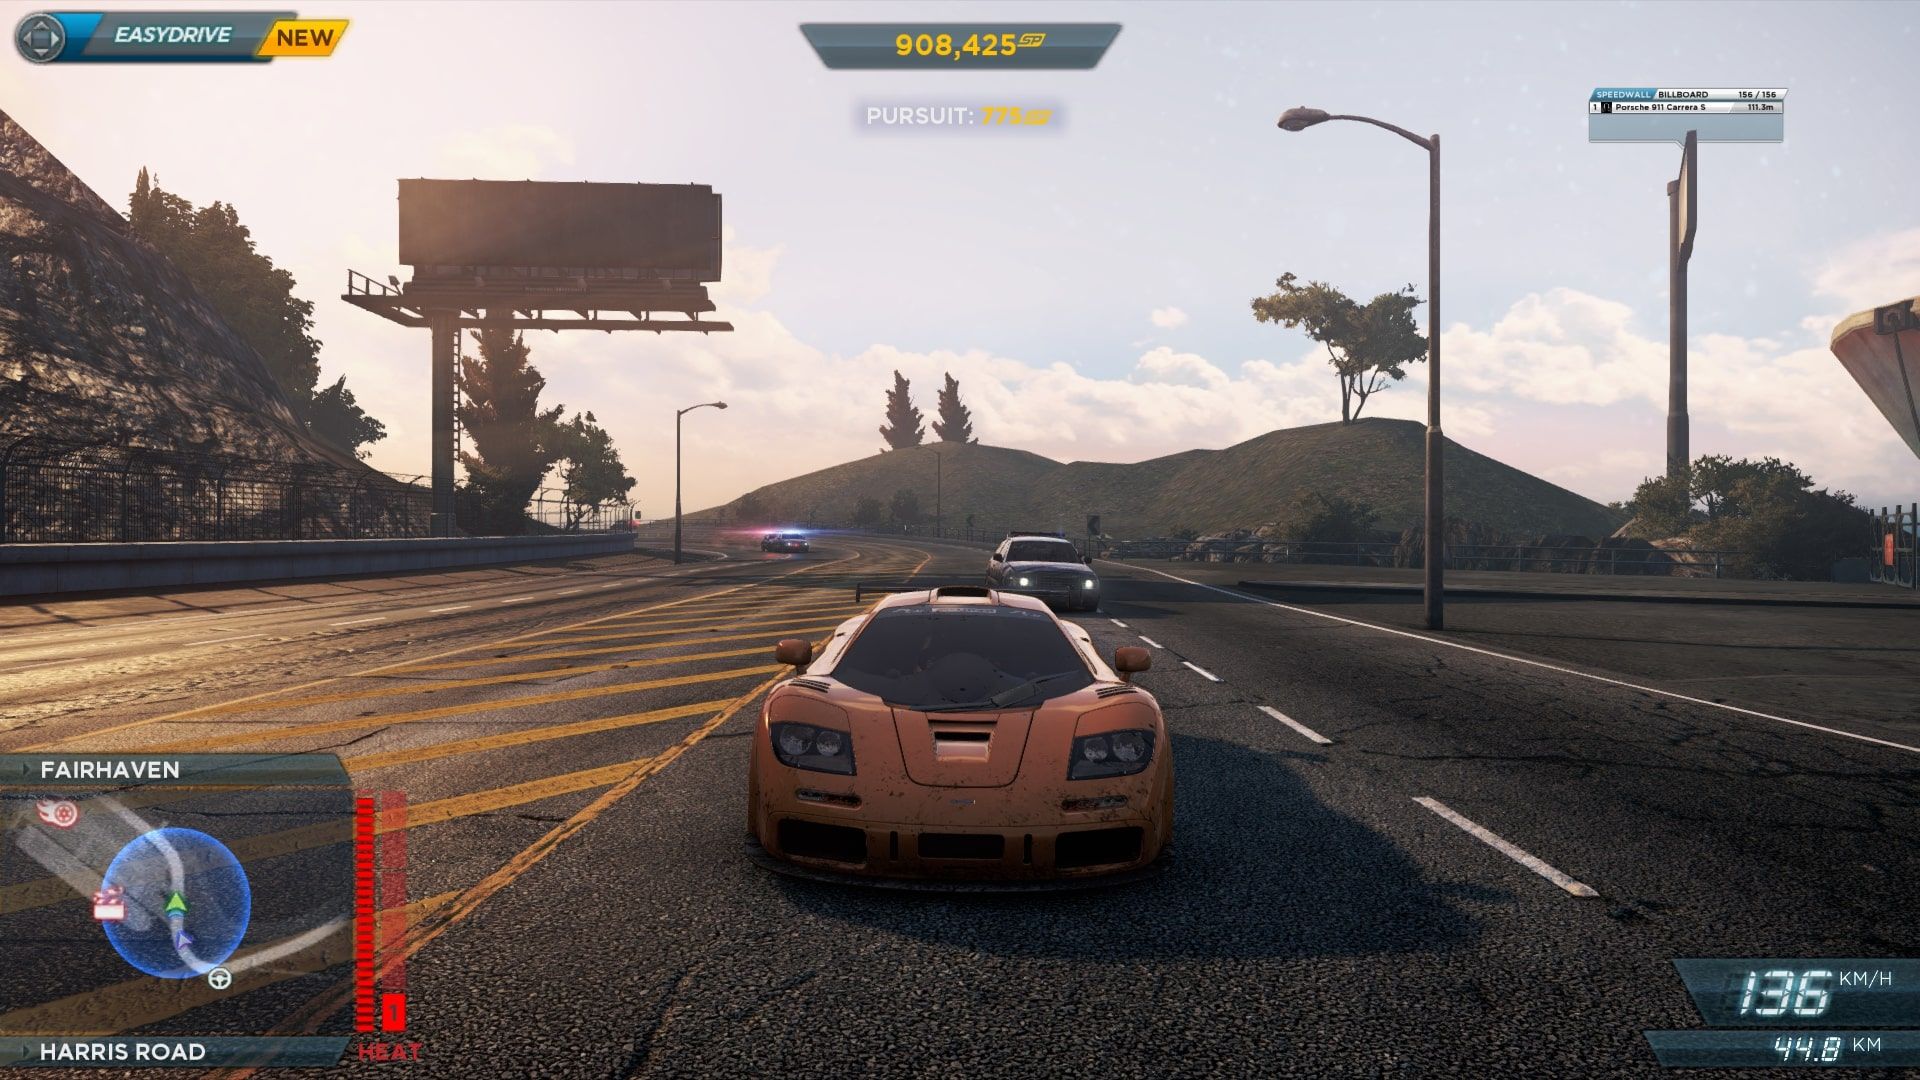 A McLaren F1 LM escaping from the police